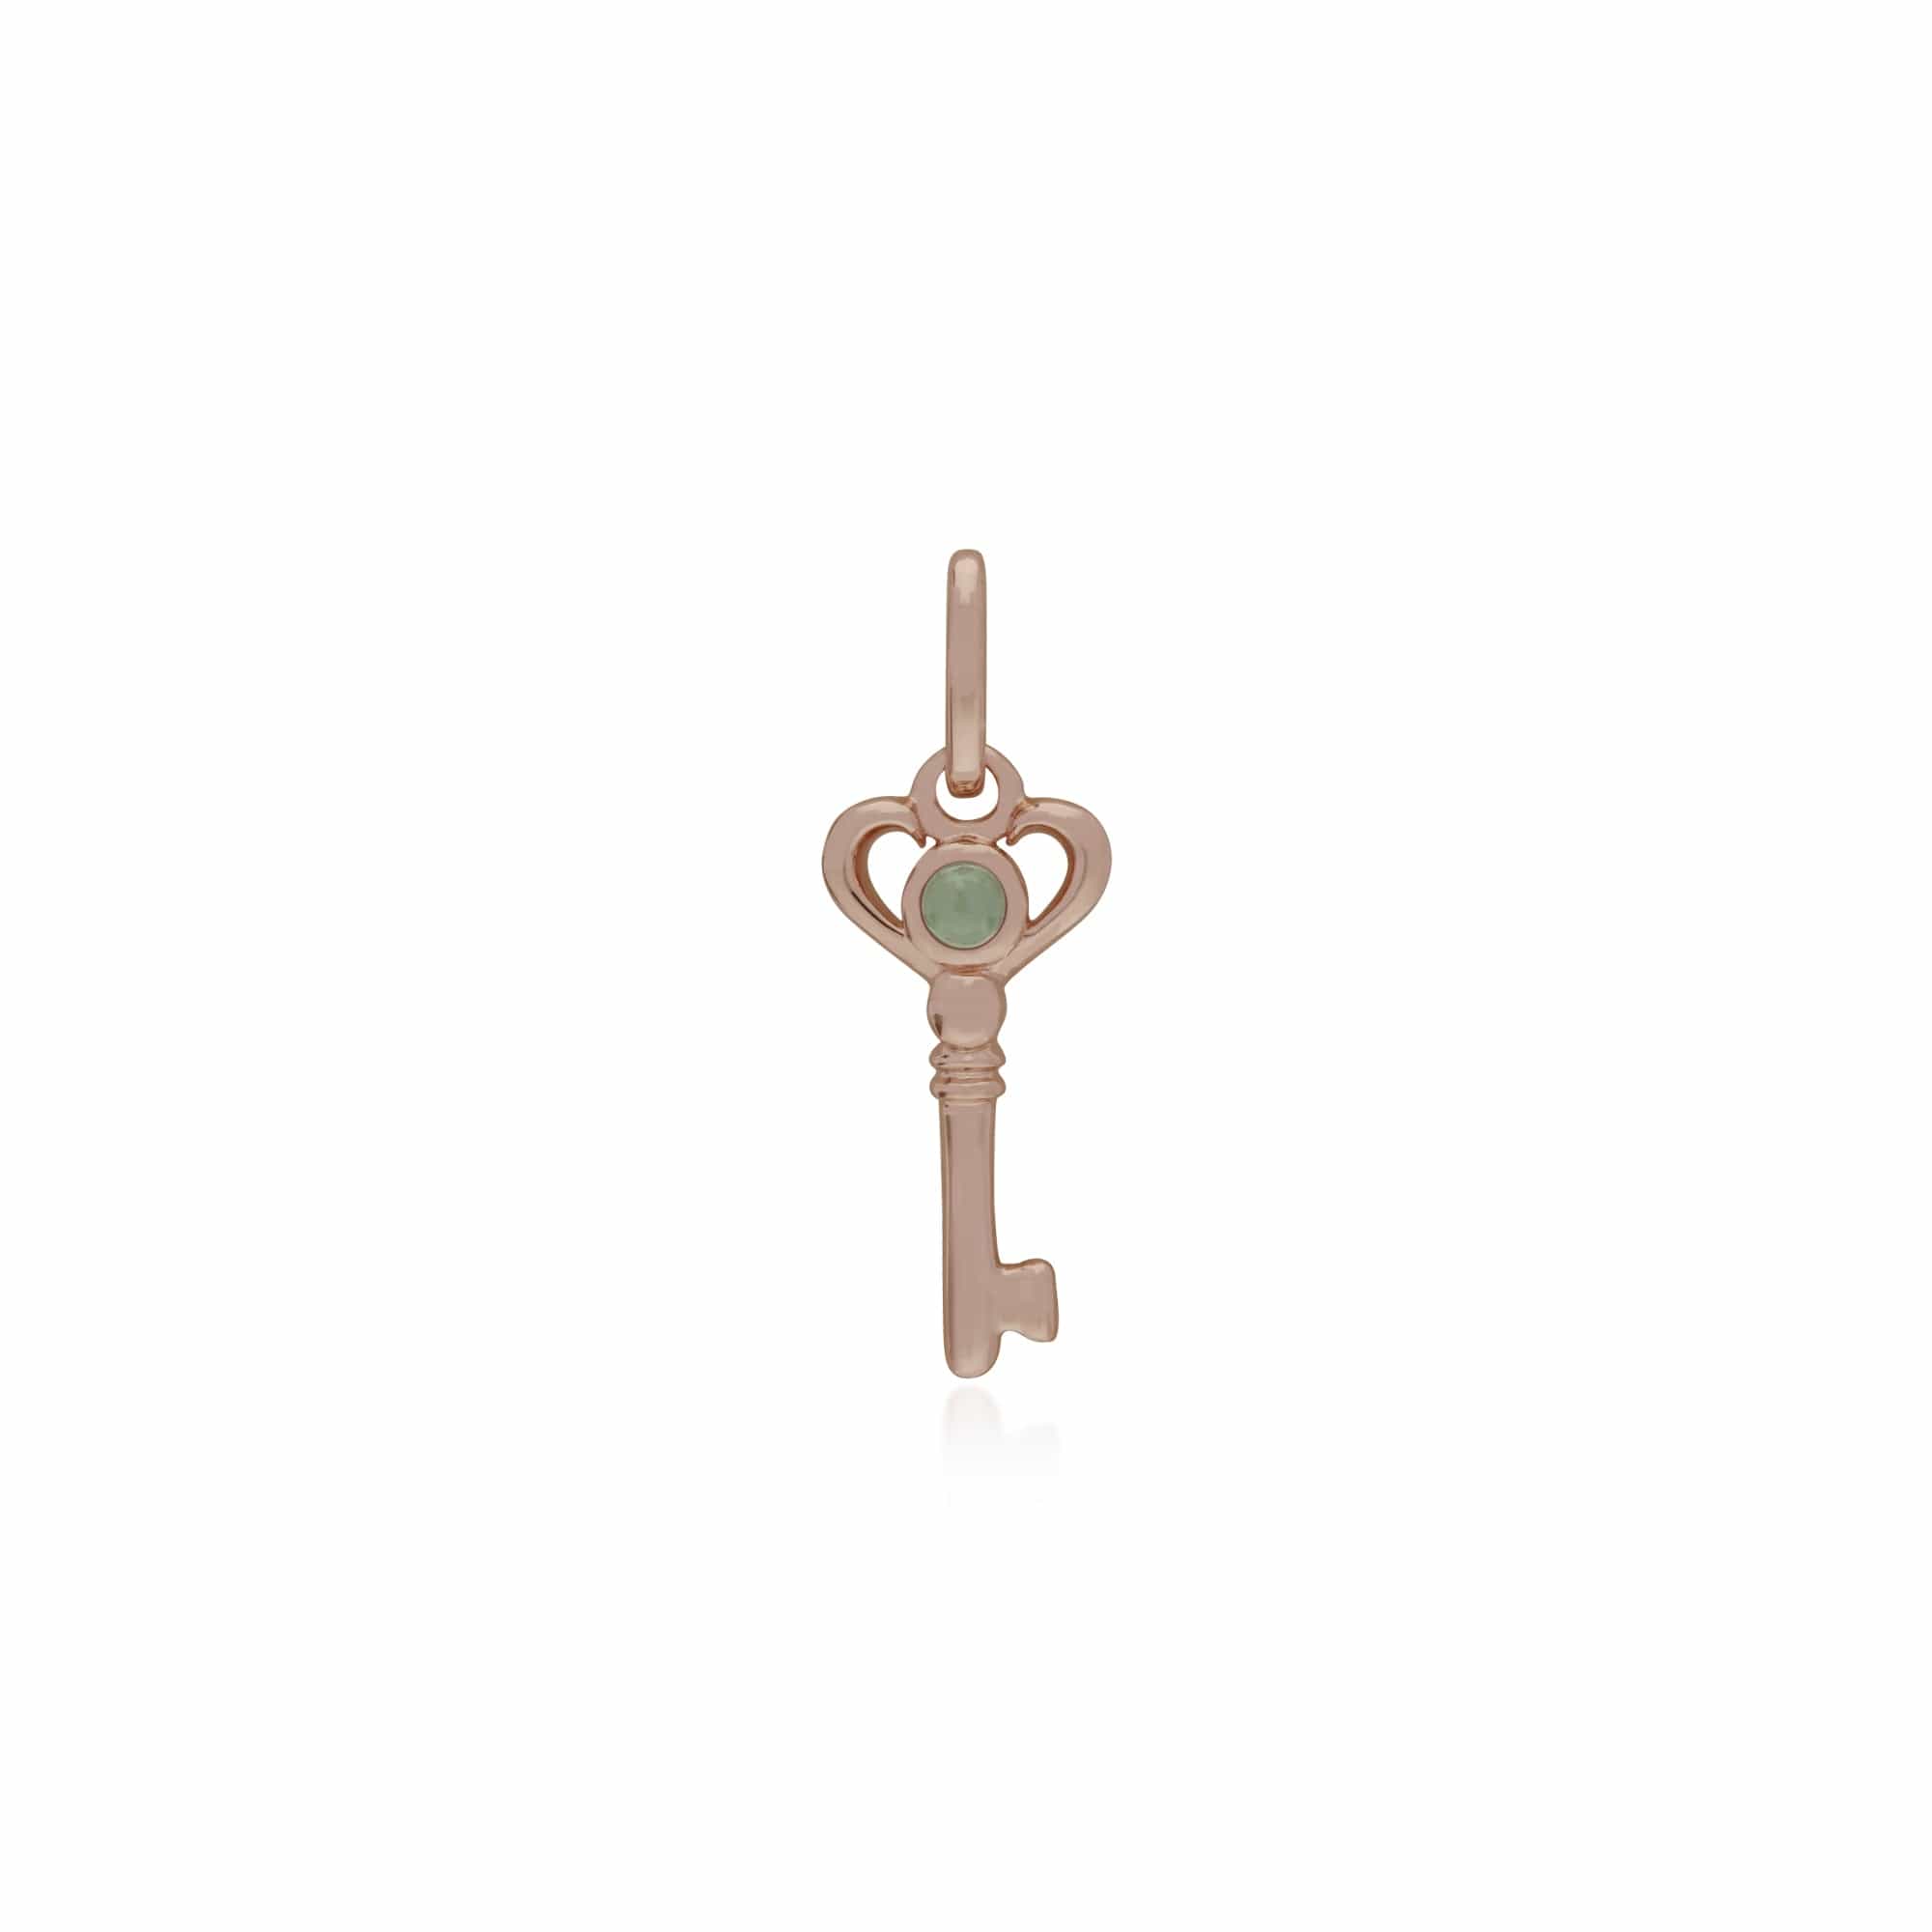 270P028603925-270P026501925 Classic Swirl Heart Lock Pendant & Jade Key Charm in Rose Gold Plated 925 Sterling Silver 2